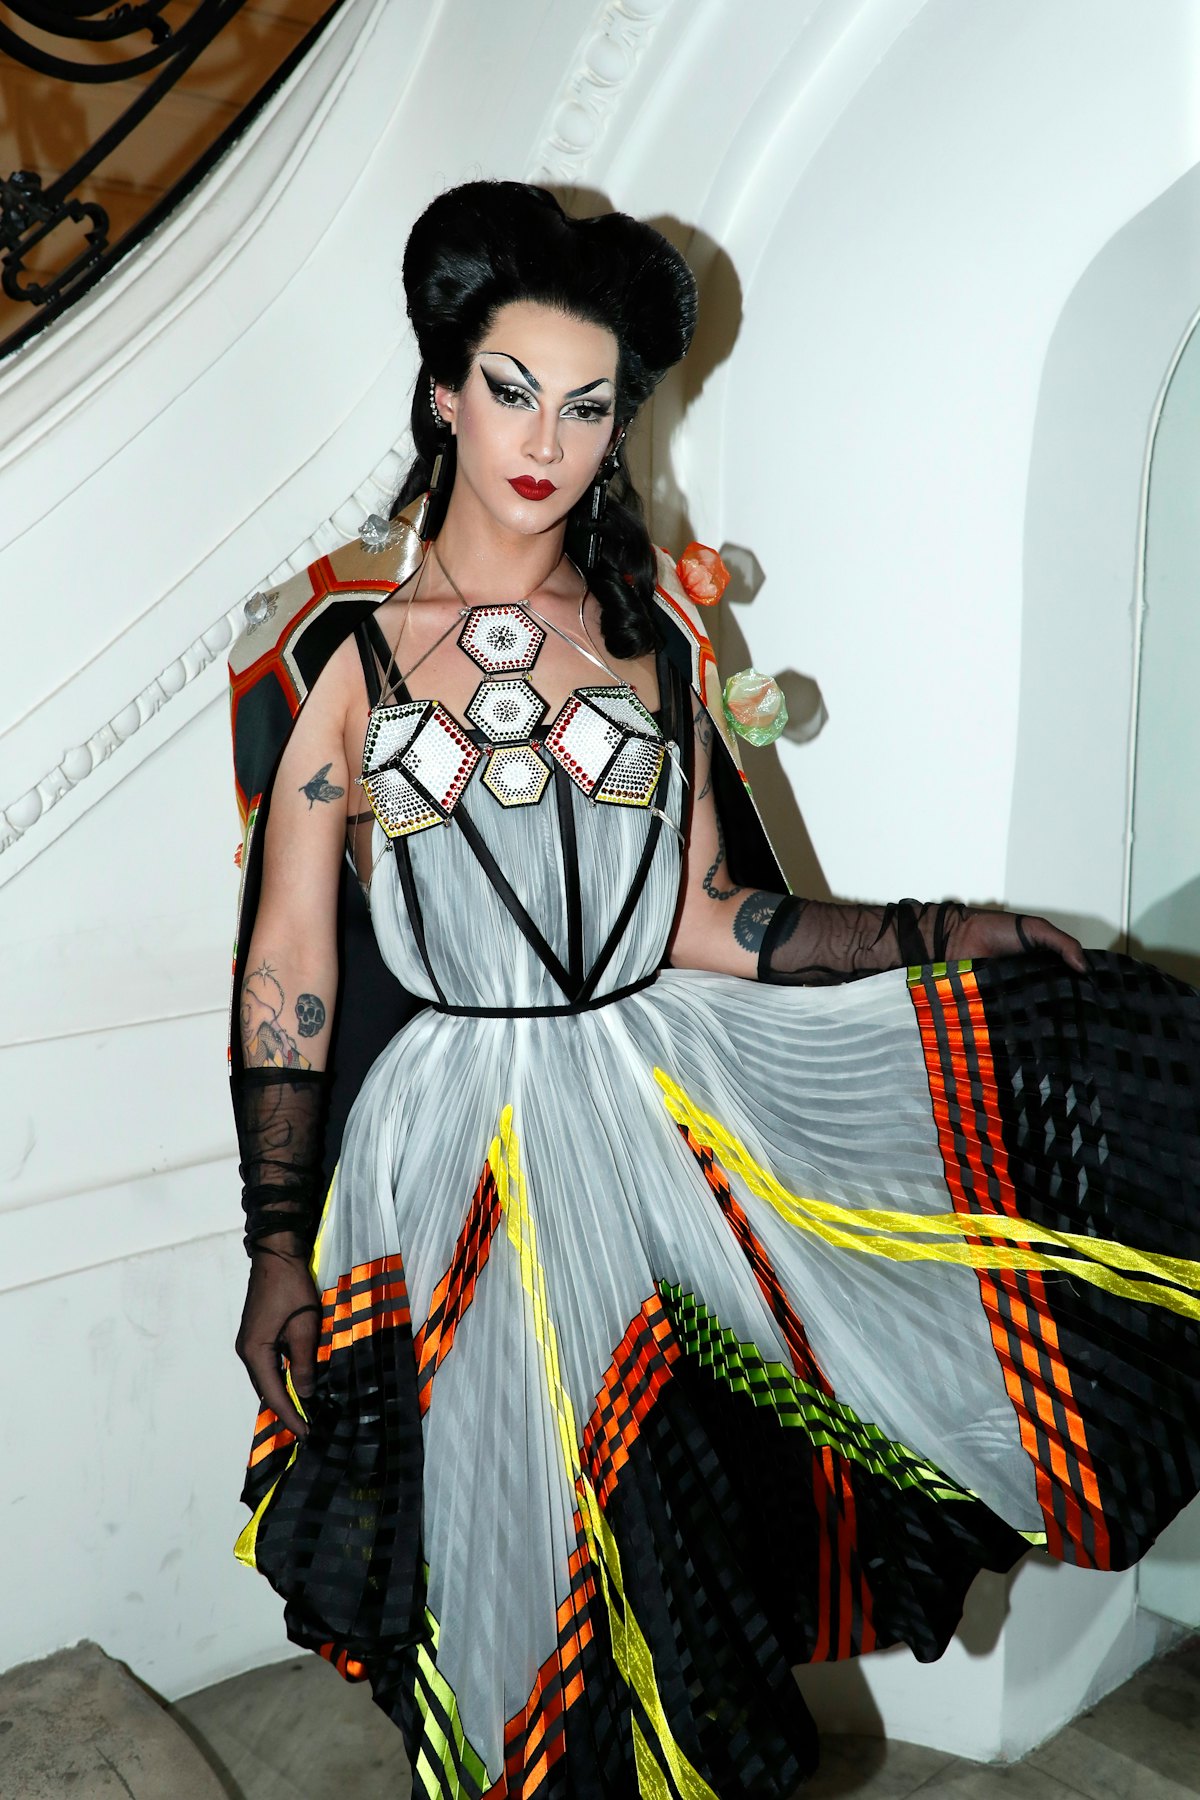 Violet Chachki’s Best Fashion Moments are a Pin-up Style Masterclass